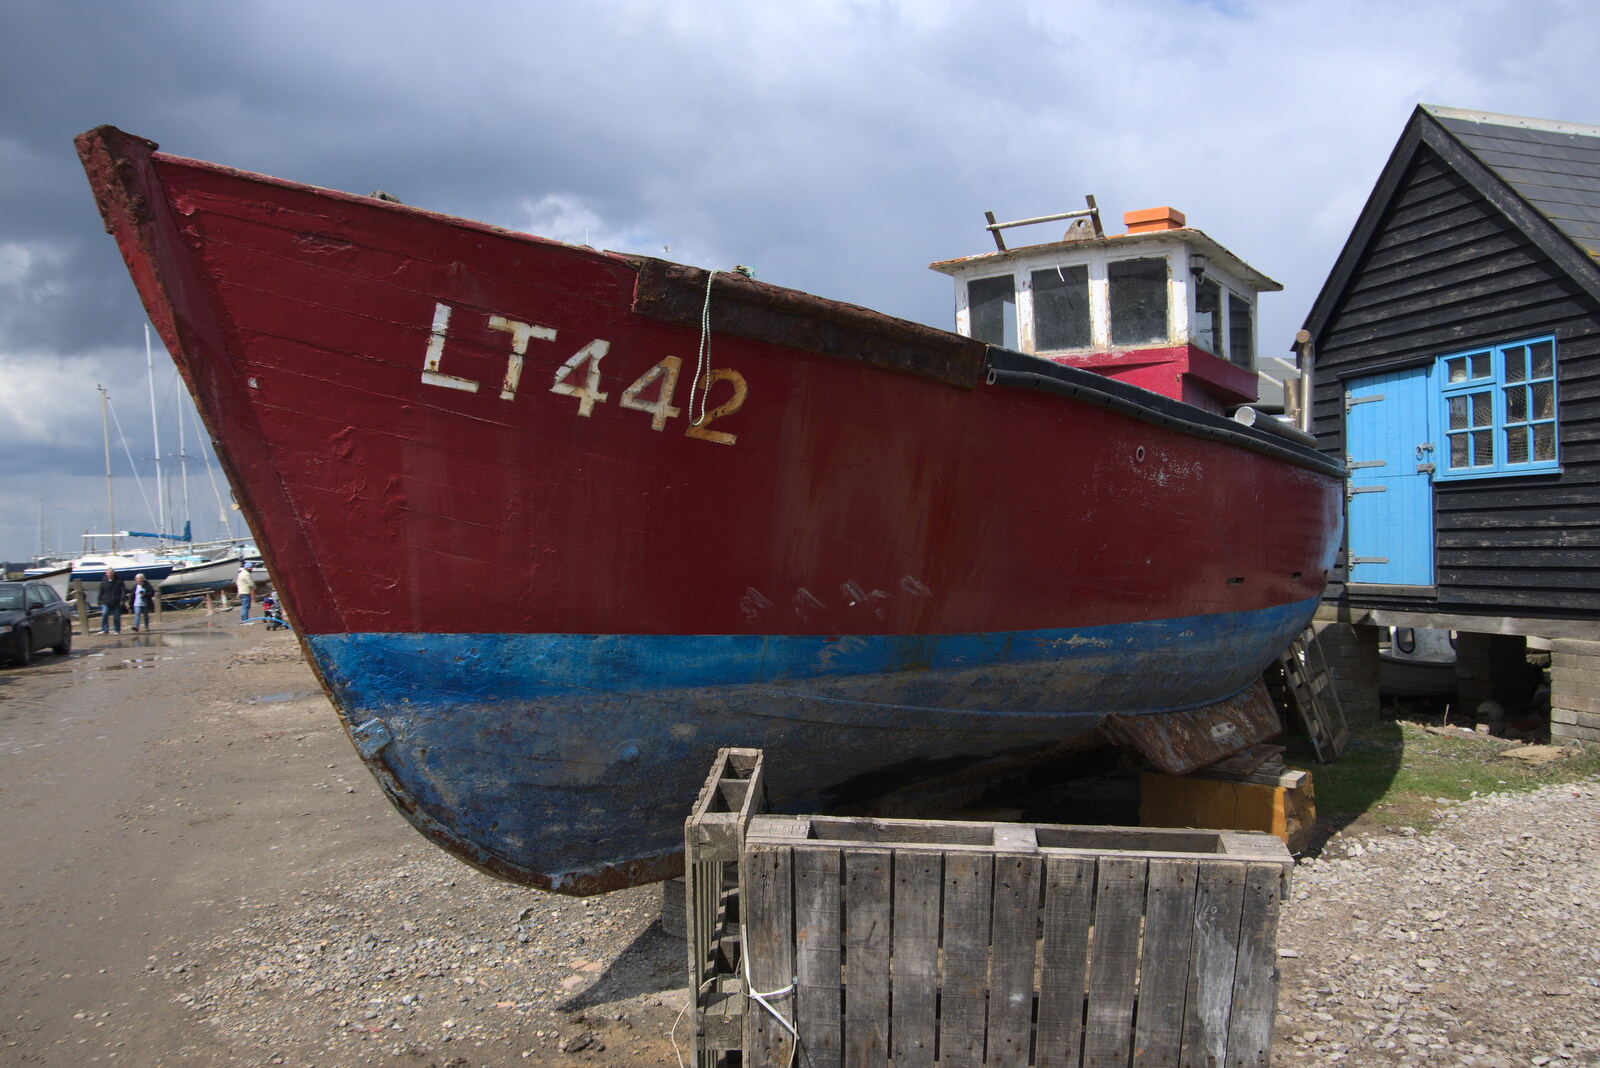 Lowestoft fishing boat LT422 from A Chilly Trip to the Beach, Southwold Harbour, Suffolk - 2nd May 2021